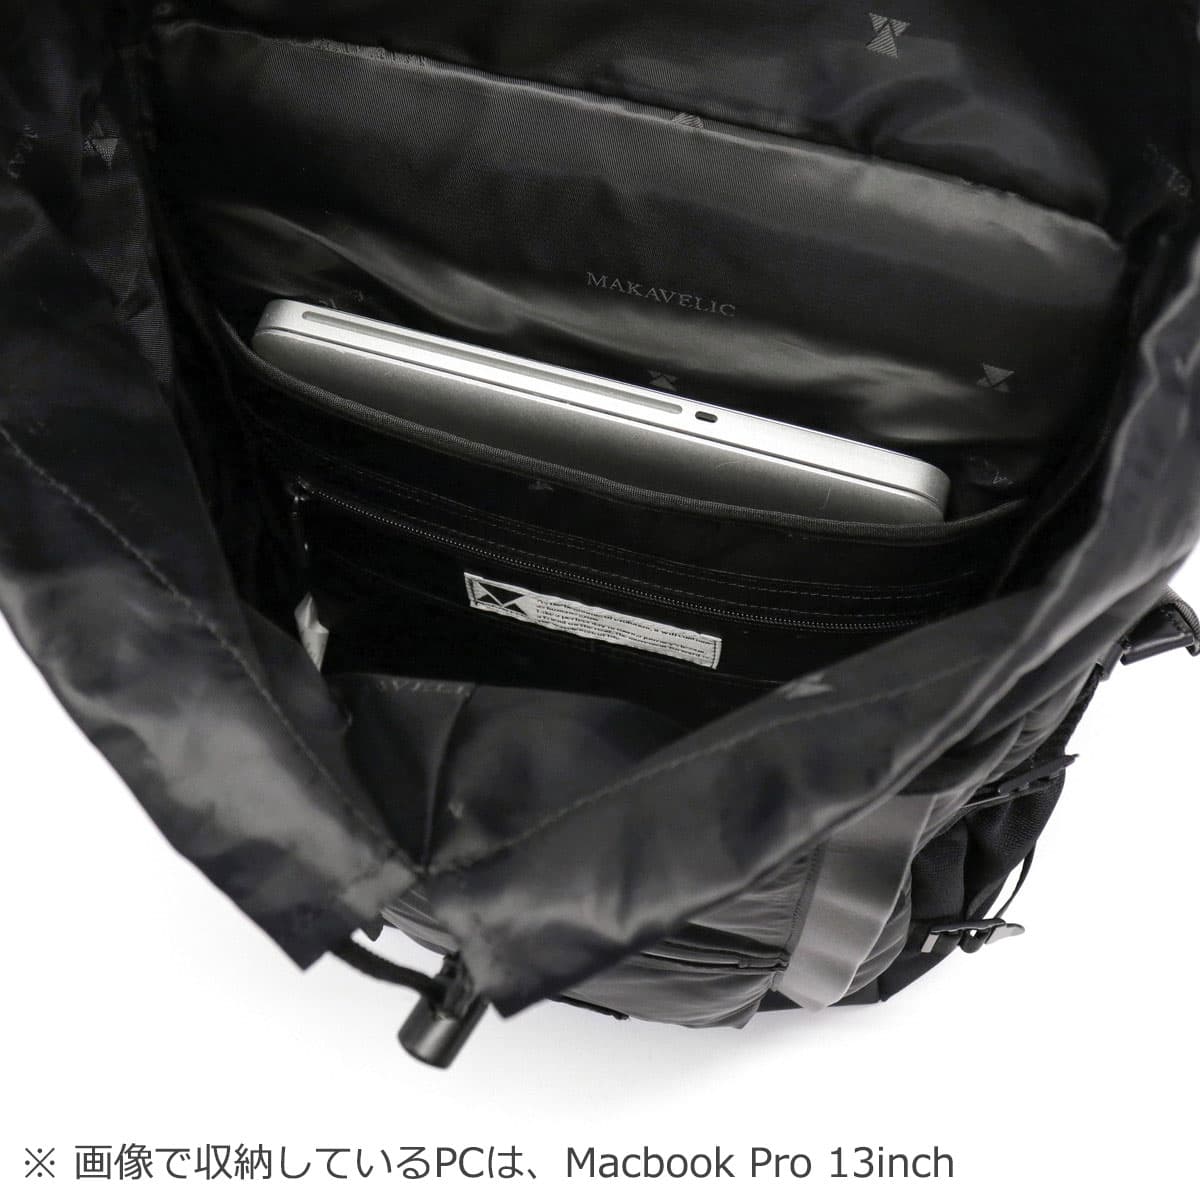 MAKAVELIC マキャベリック CHASE DOUBLE LINE BACKPACK BLACK EDITION 